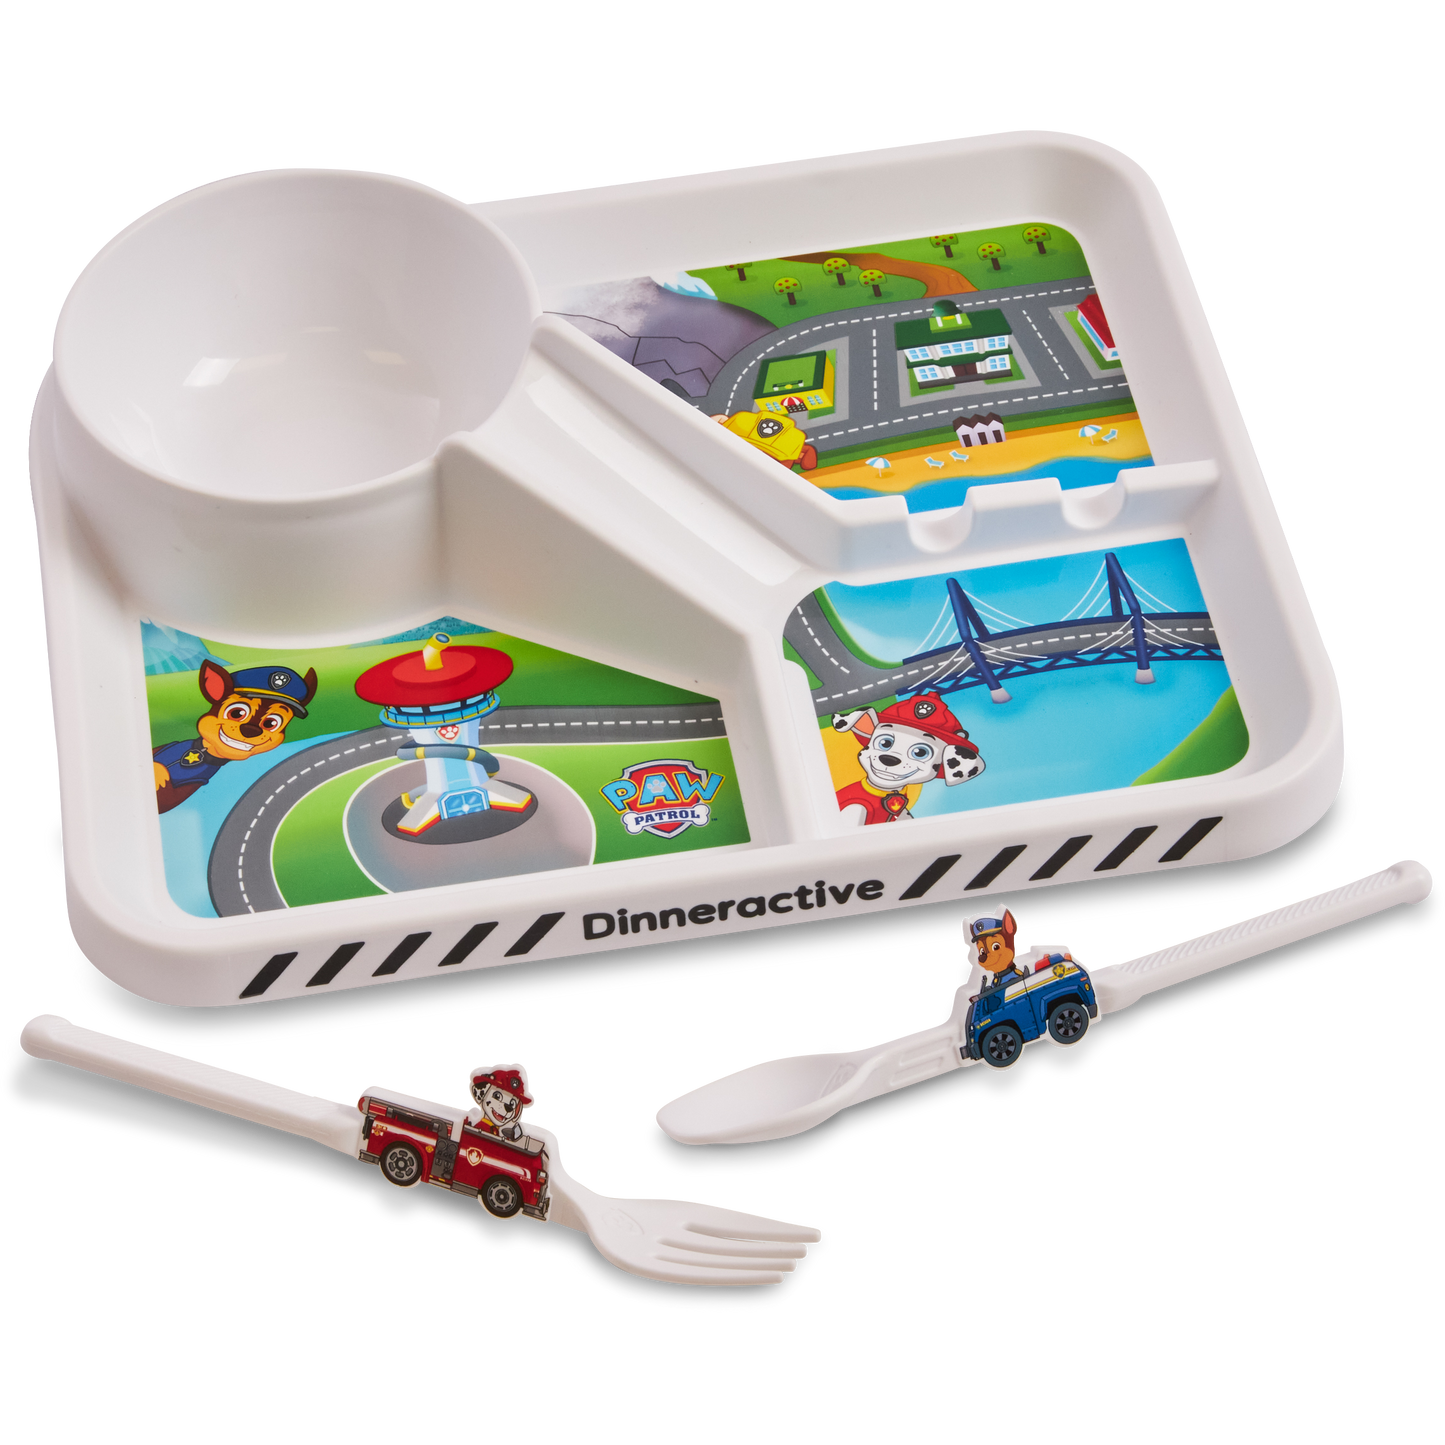 PAW Patrol Themed<BR> Dining Sets for Kids<BR> (3-Piece Set)